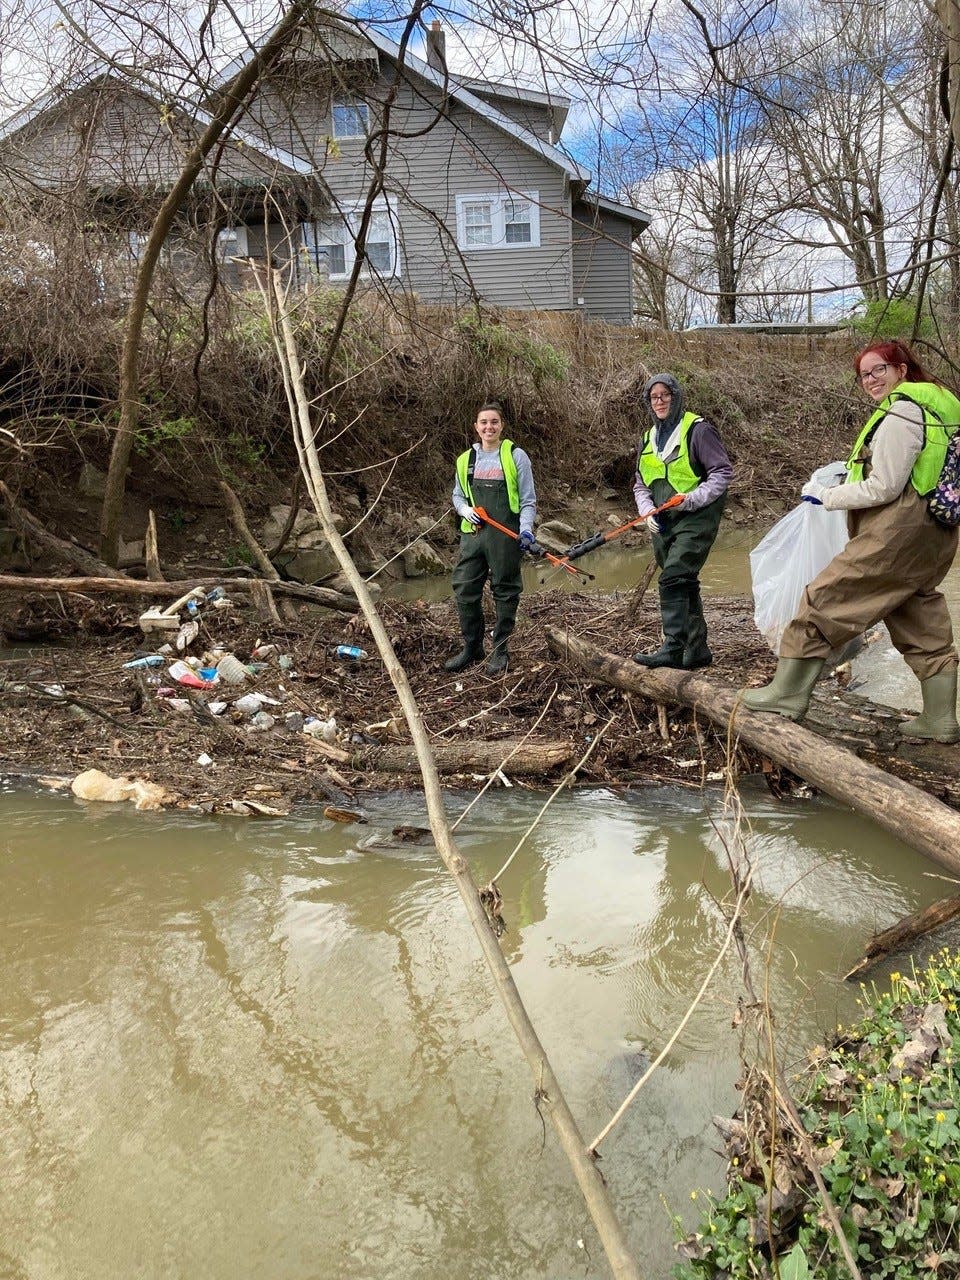 Volunteers remove trash and debris from outdoor spaces during a Keep Knoxville Beautiful event.